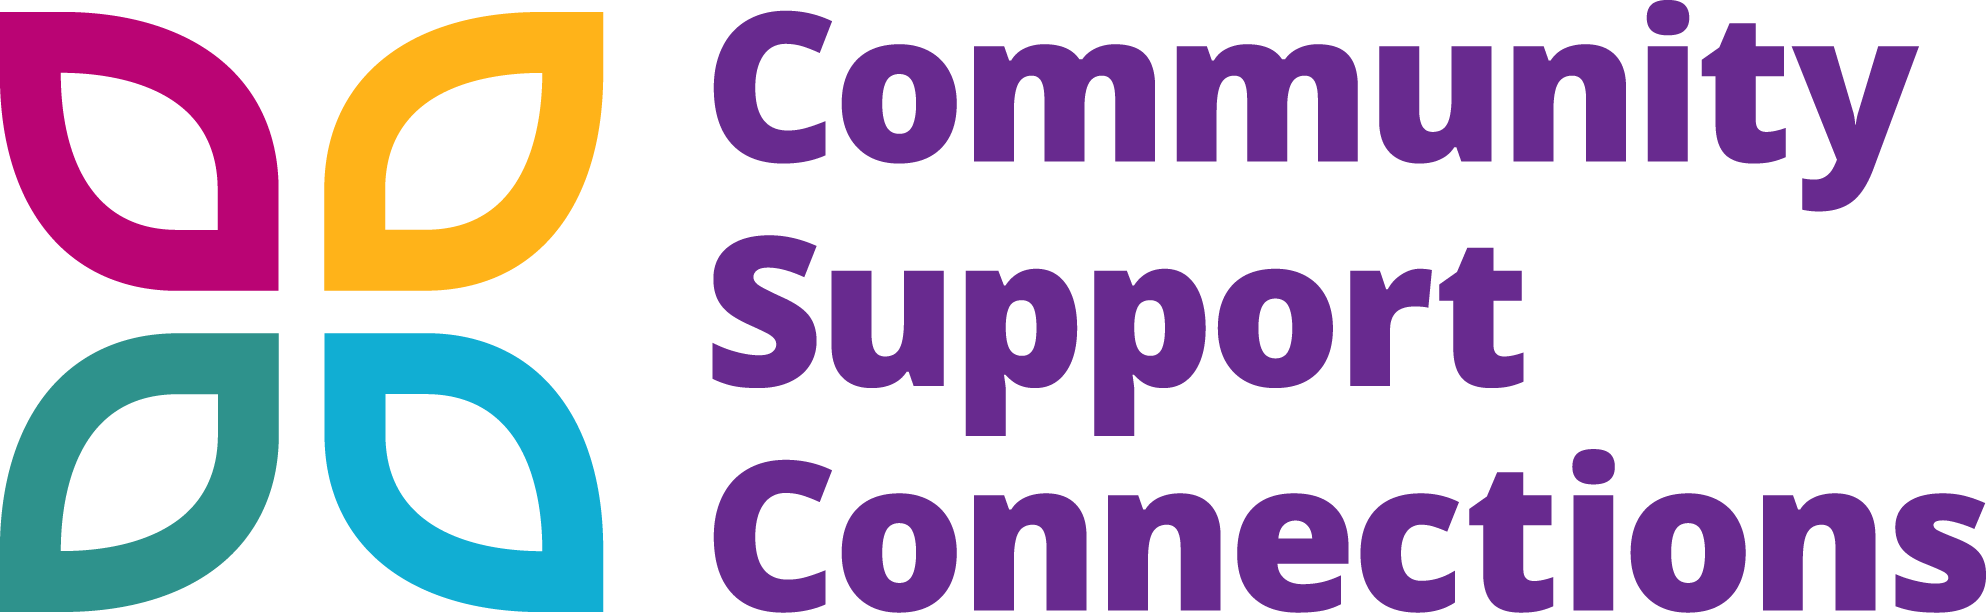 Showcase Image for Community Support Connections